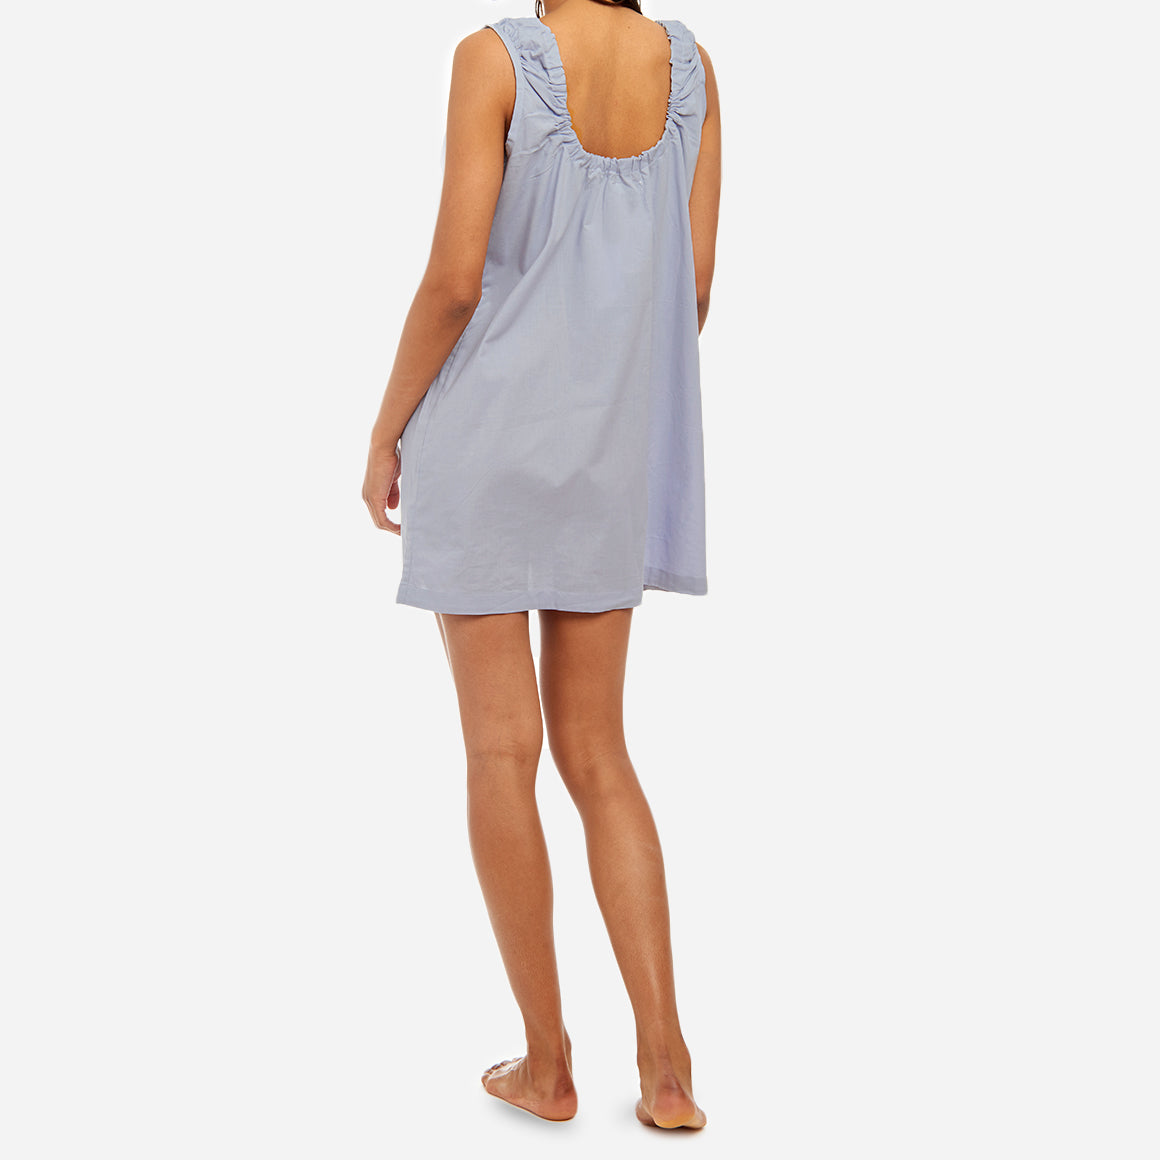 Made from a breathable and soft GOTS-certified organic cotton that feels light and airy on your skin, you’ll love the flattering drape of the material and comfy, unrestricted fit. The deep armholes and low scoop back provide maximum comfort for your bedtime and morning rituals.